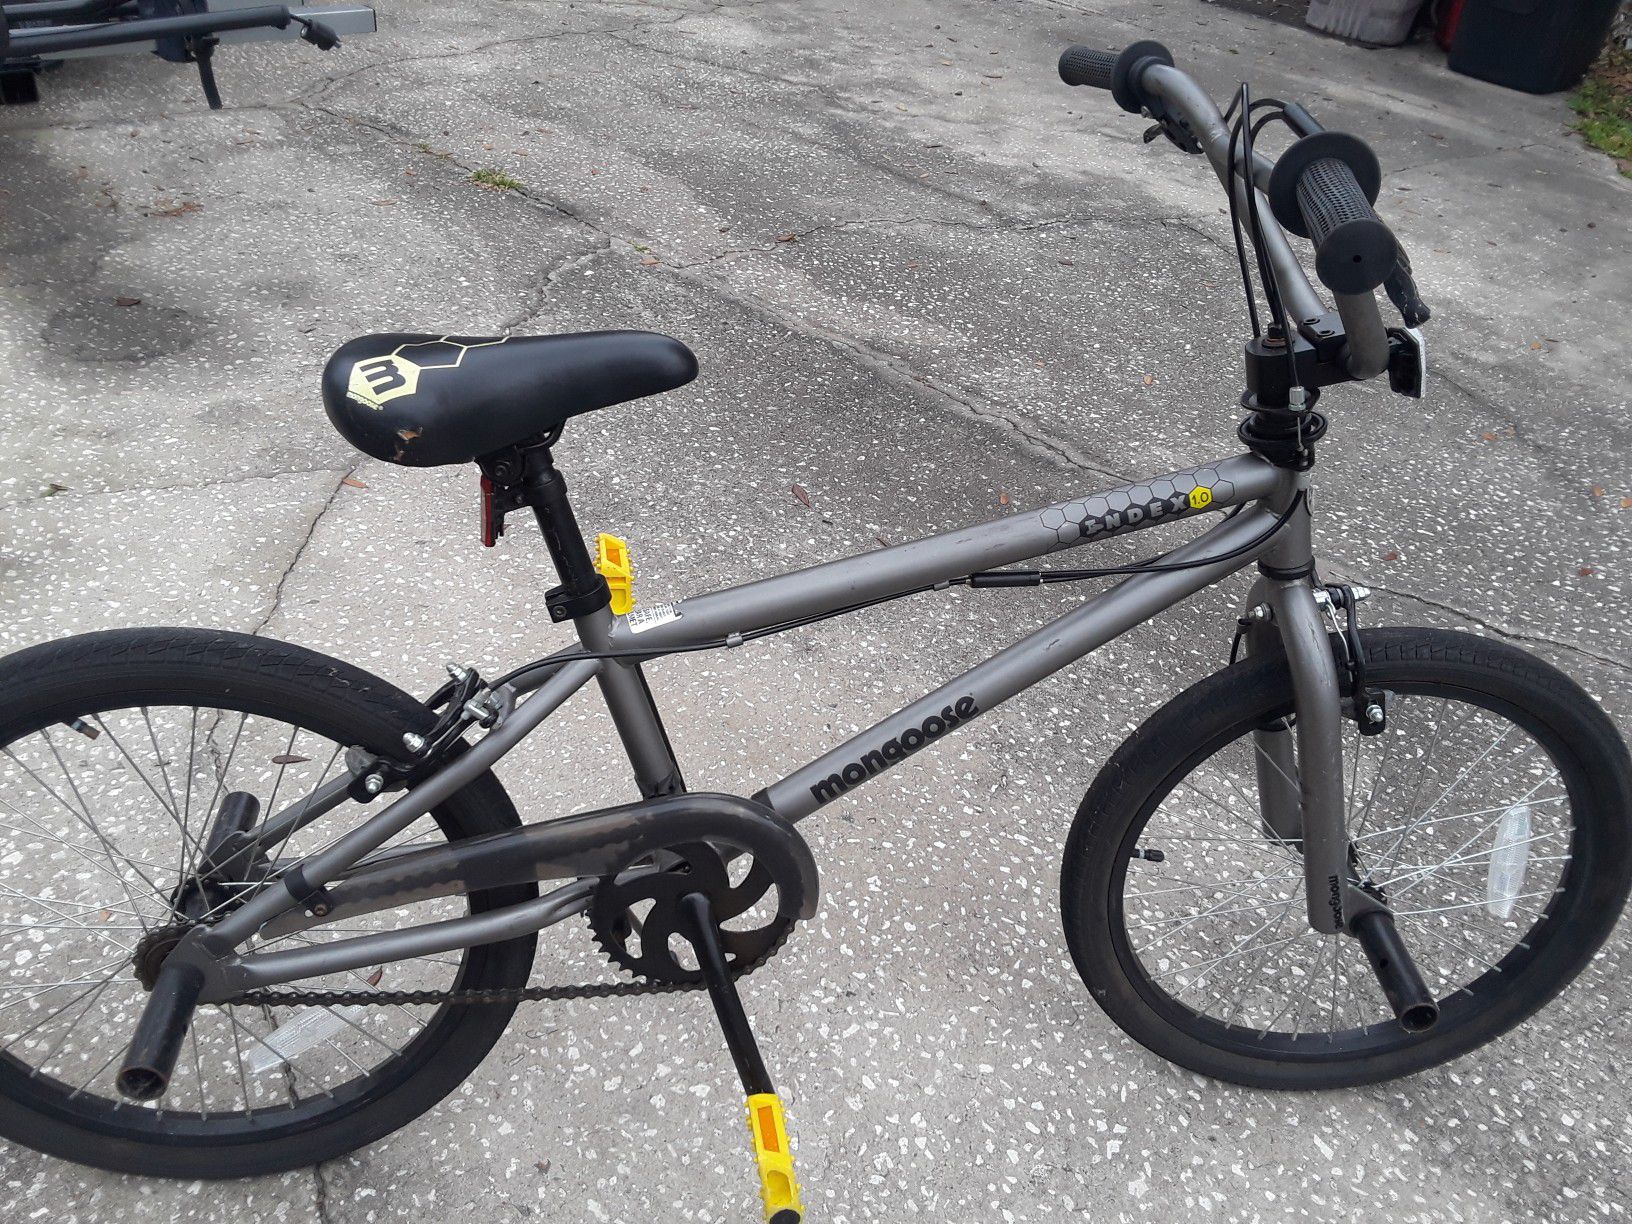 Mongoose Index Freestyle BMX bike with 20" tires, excellent condition.